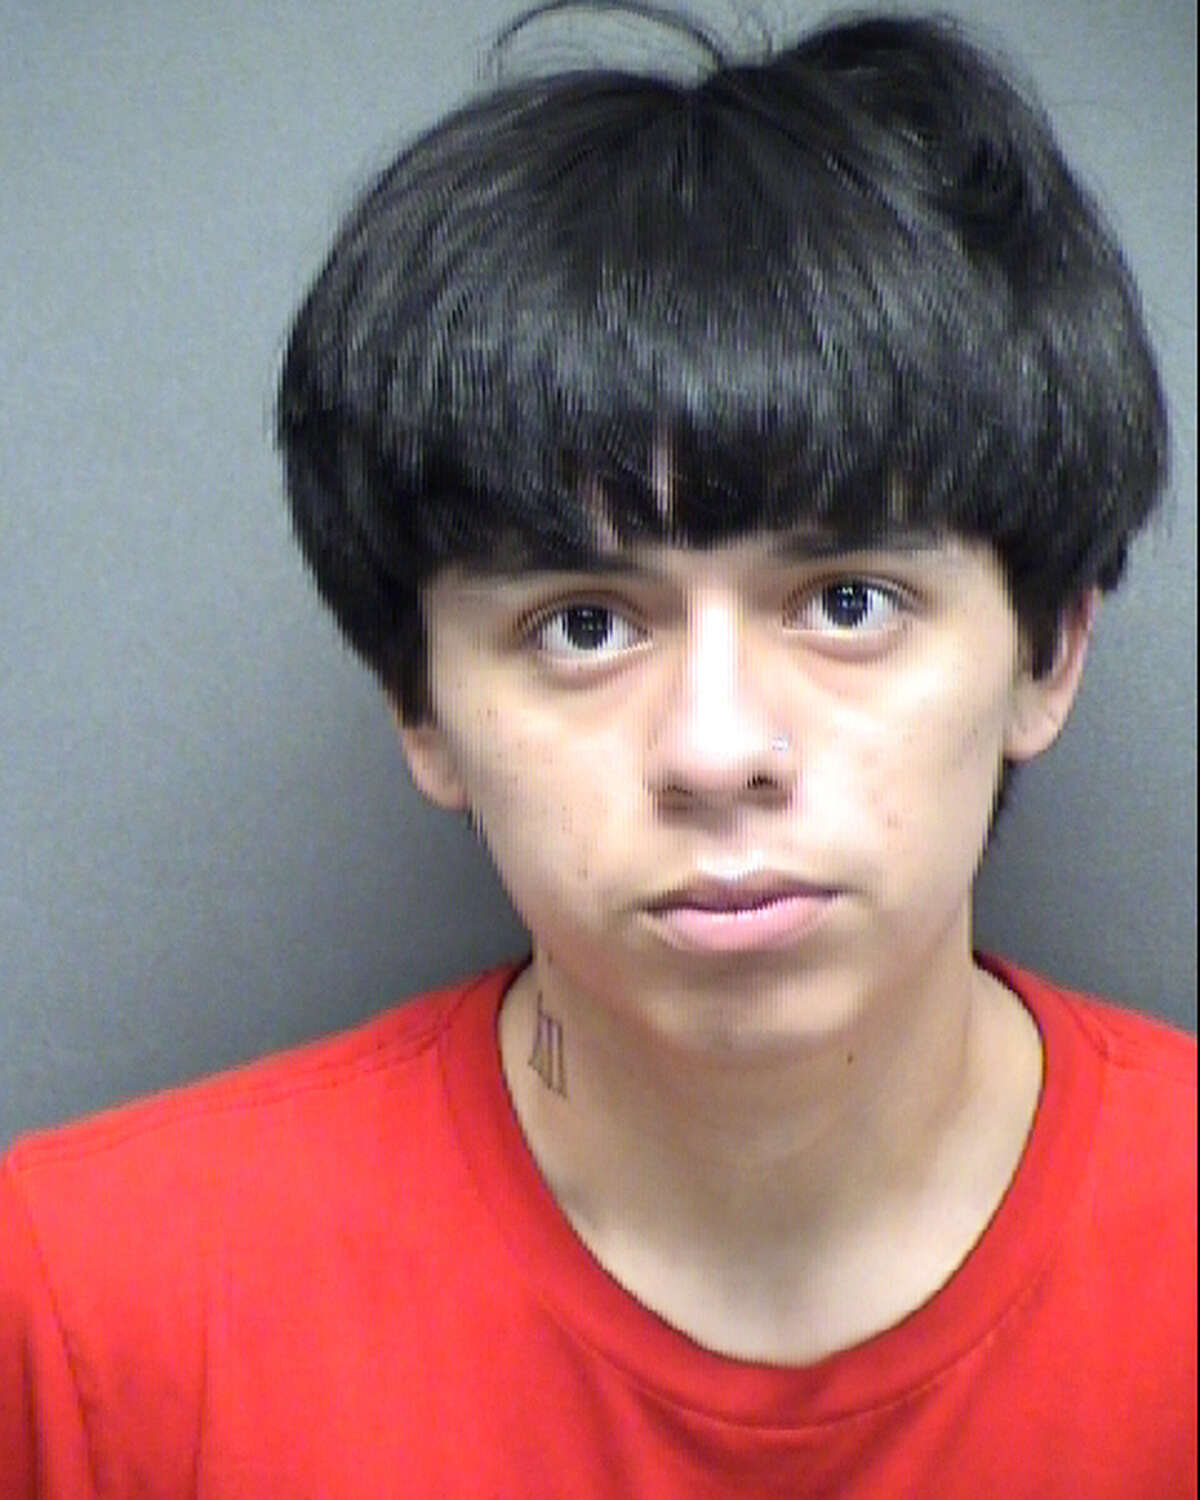 Jesse Moses Gonzalez, 18, is charged with tampering with evidence and theft up to $30,000.